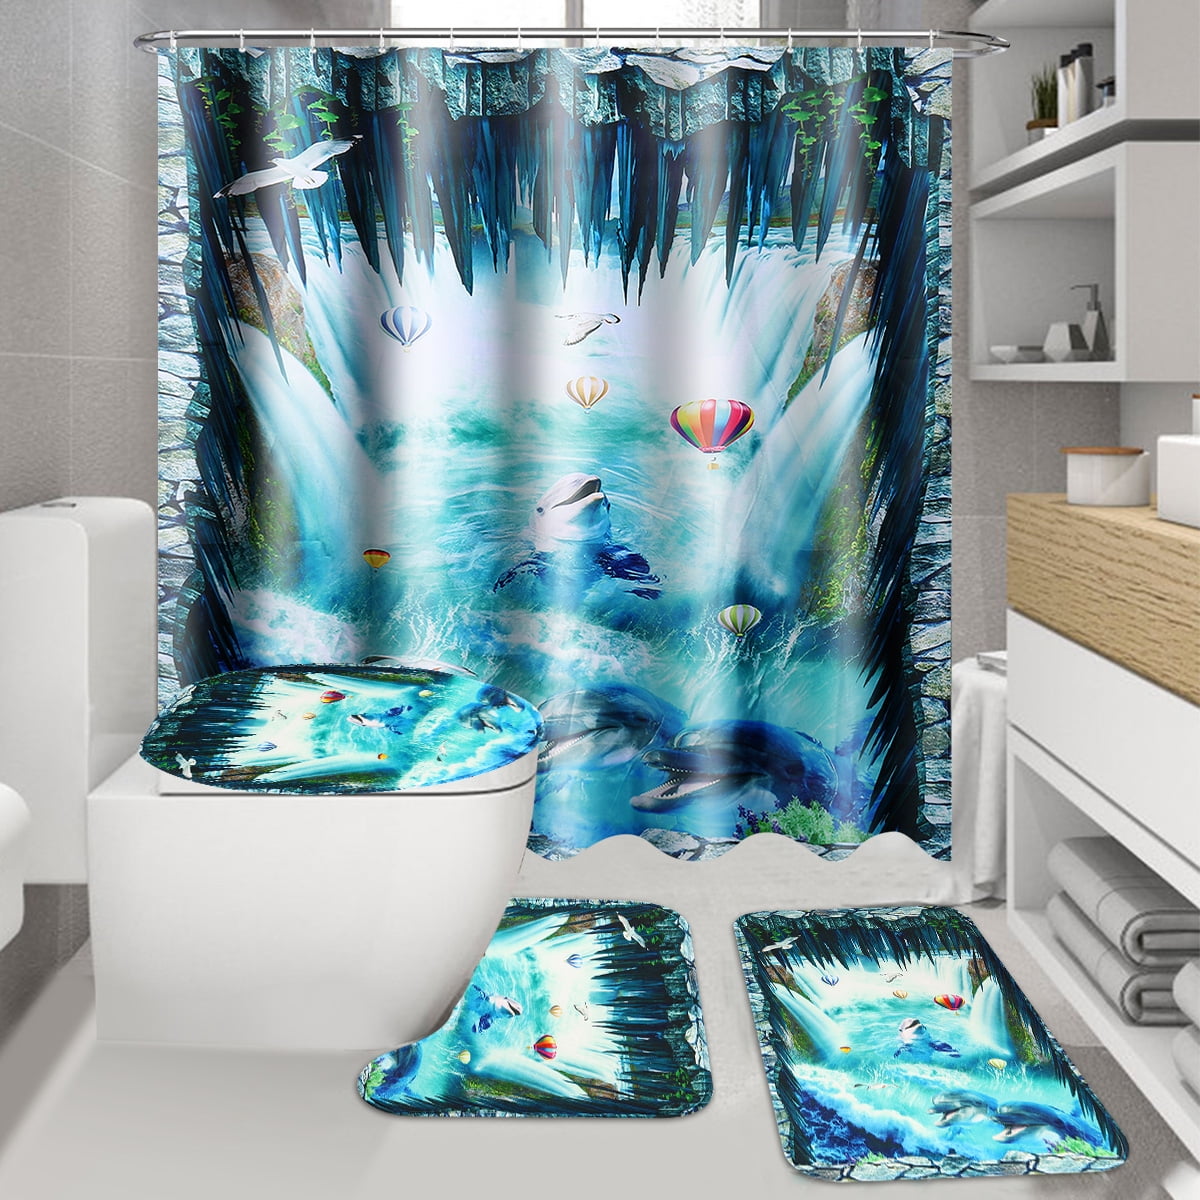 Blue Shower Curtains with Bath Mats Set 4 Pcs Flower Butterfly Bath Decor with Toilet Lid Cover,Non-Slip Rug,Bath Rugs and Floral Waterproof Shower Curtain with Hooks